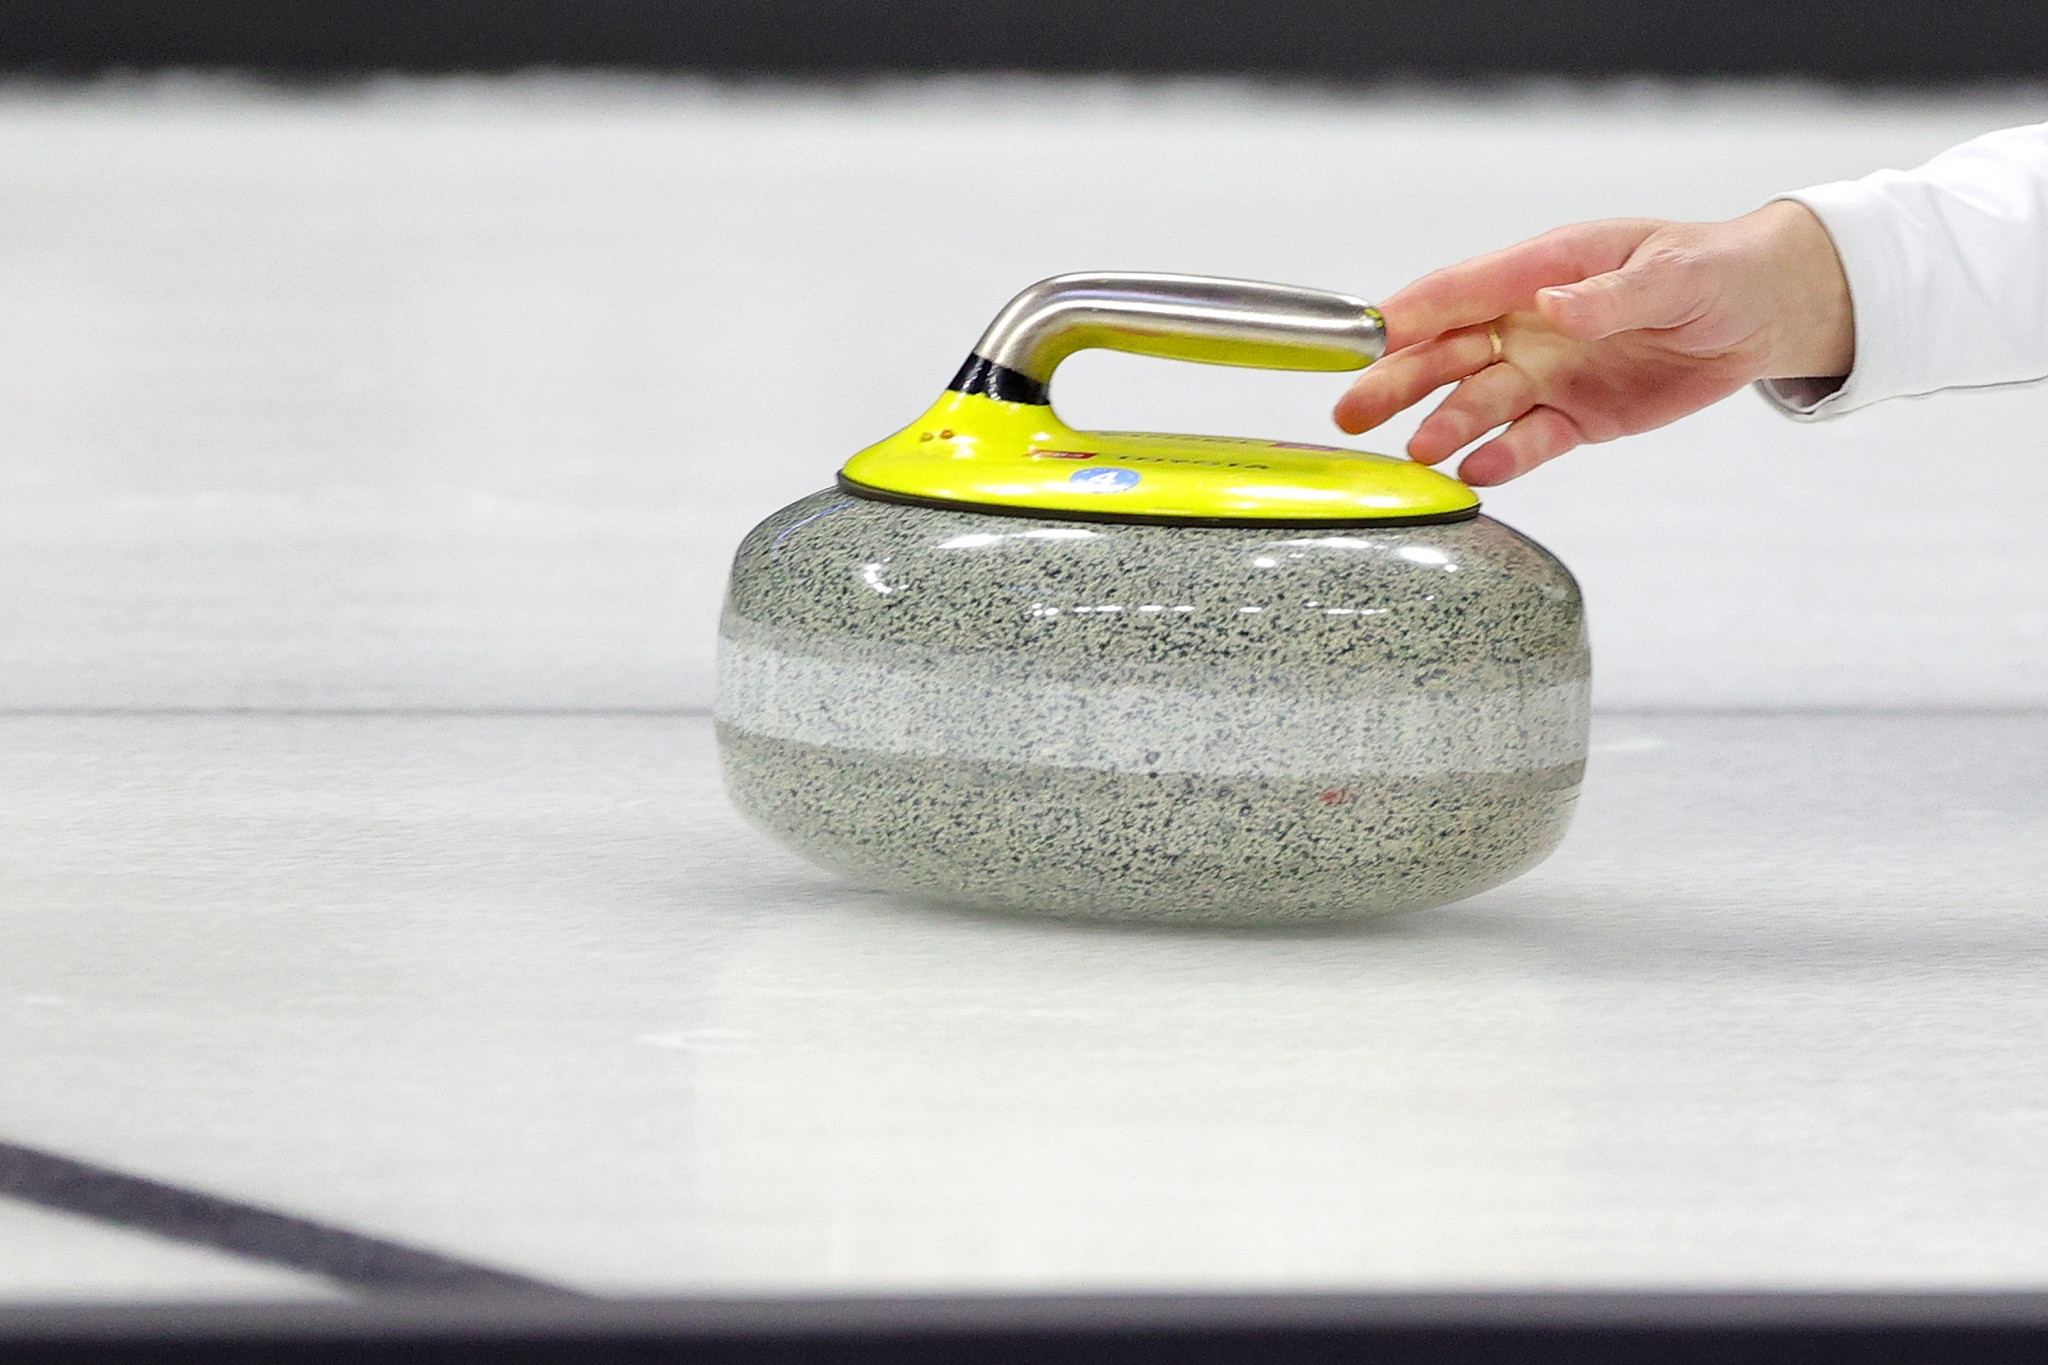 Five more nations qualify for next round at World Mixed Curling Championship in Aberdeen